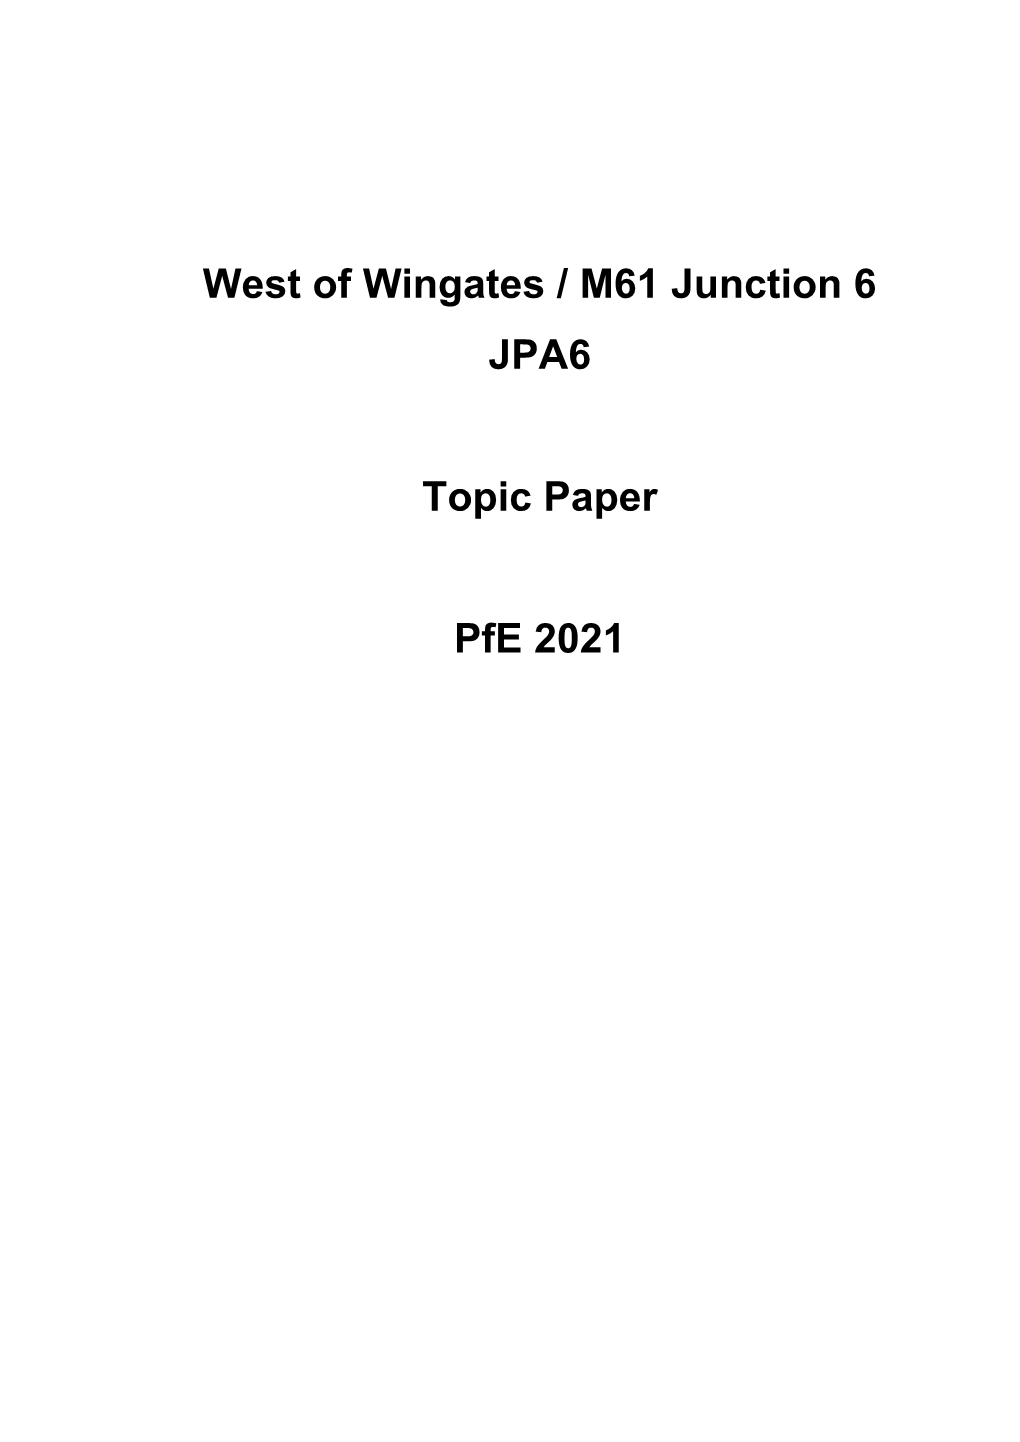 West of Wingates / M61 Junction 6 JPA6 Topic Paper Pfe 2021